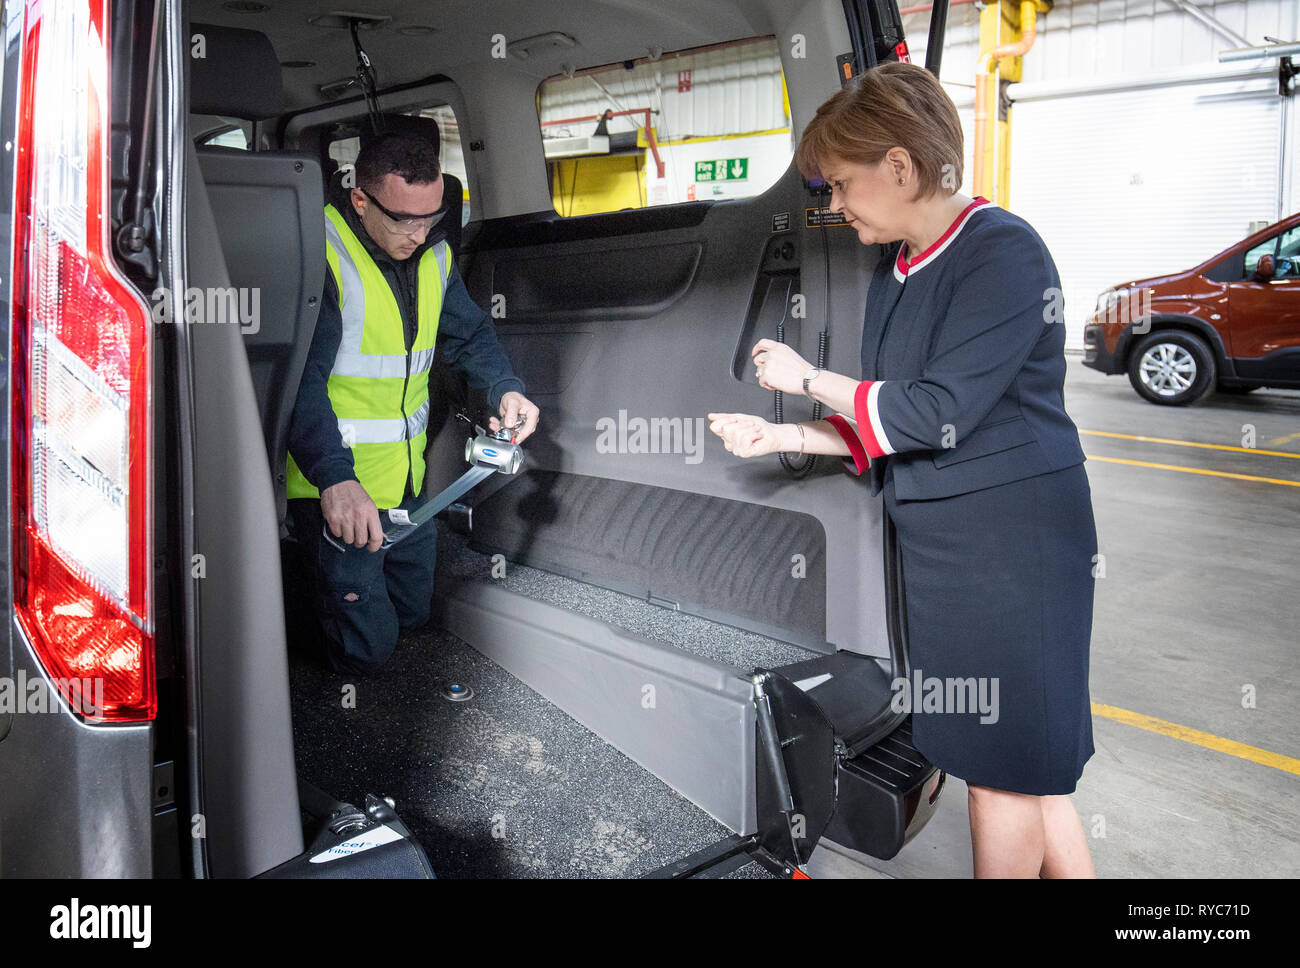 First Minister Nicola Sturgeon with team leader Chris Beard (left) during a visit to Allied Vehicles Ltd in Glasgow where cars are converted and modified to make them wheelchair accessible. Stock Photo